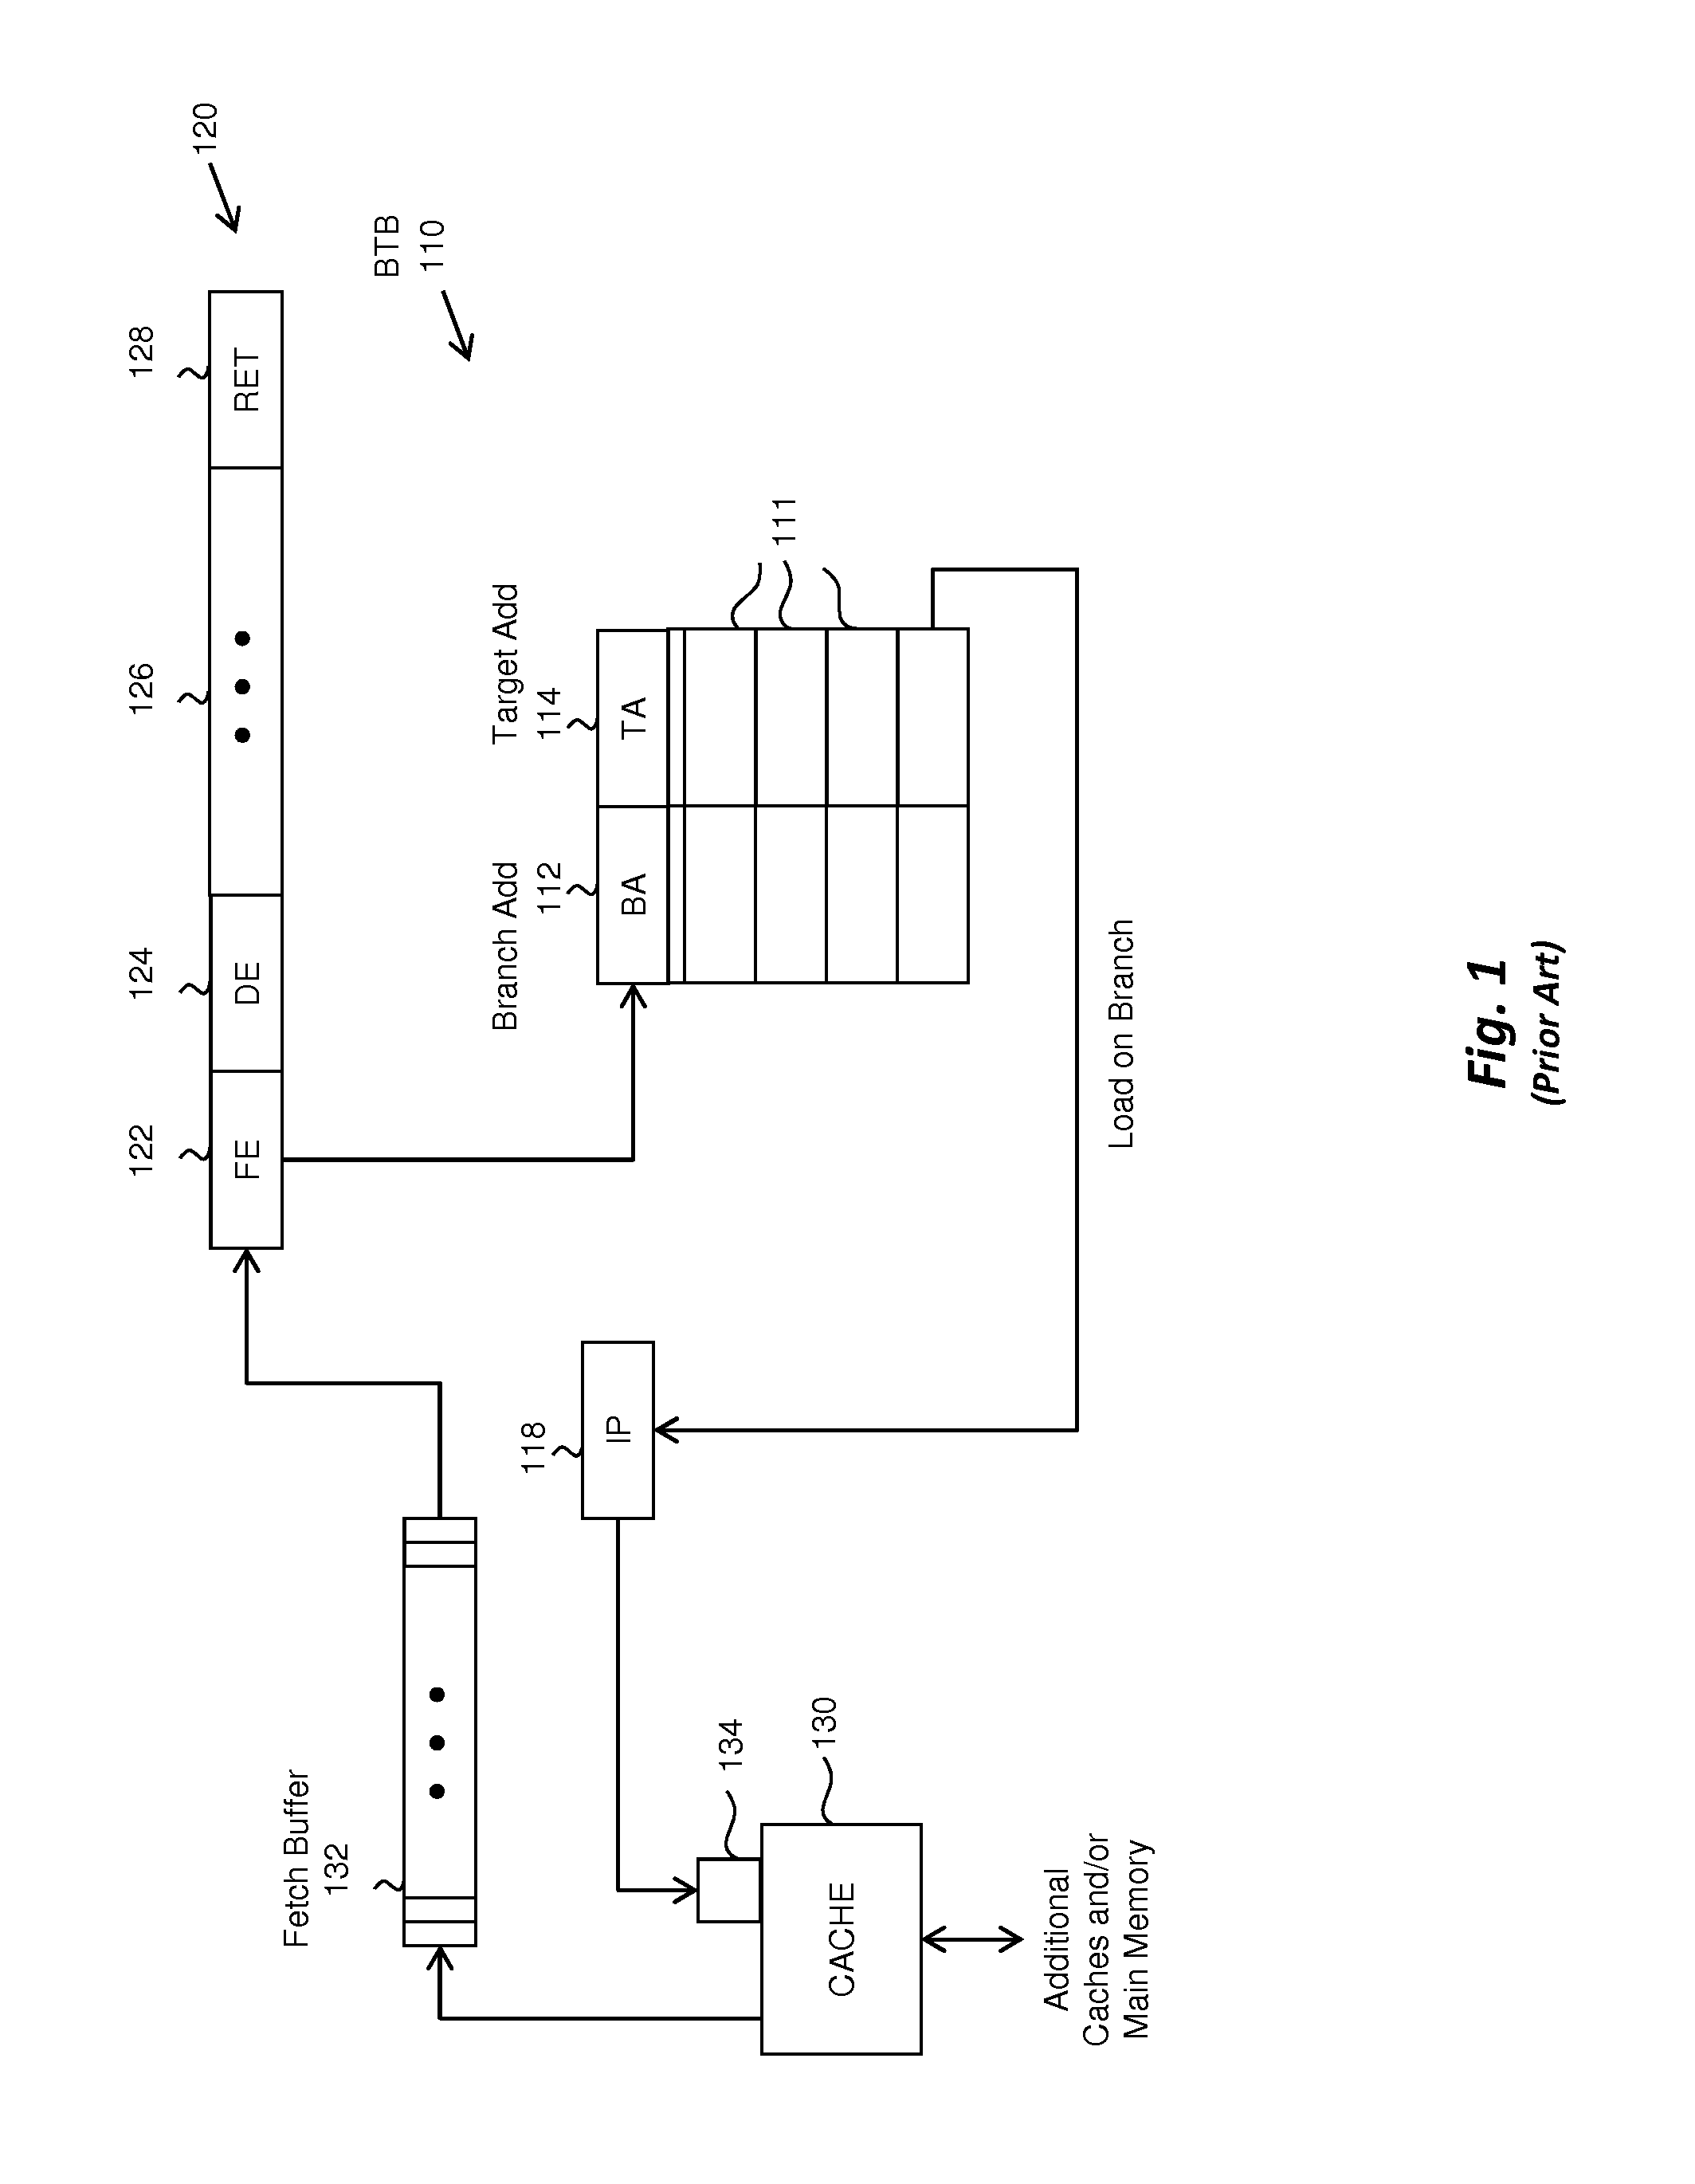 Method and apparatus for reducing power consumption in a processor by powering down an instruction fetch unit